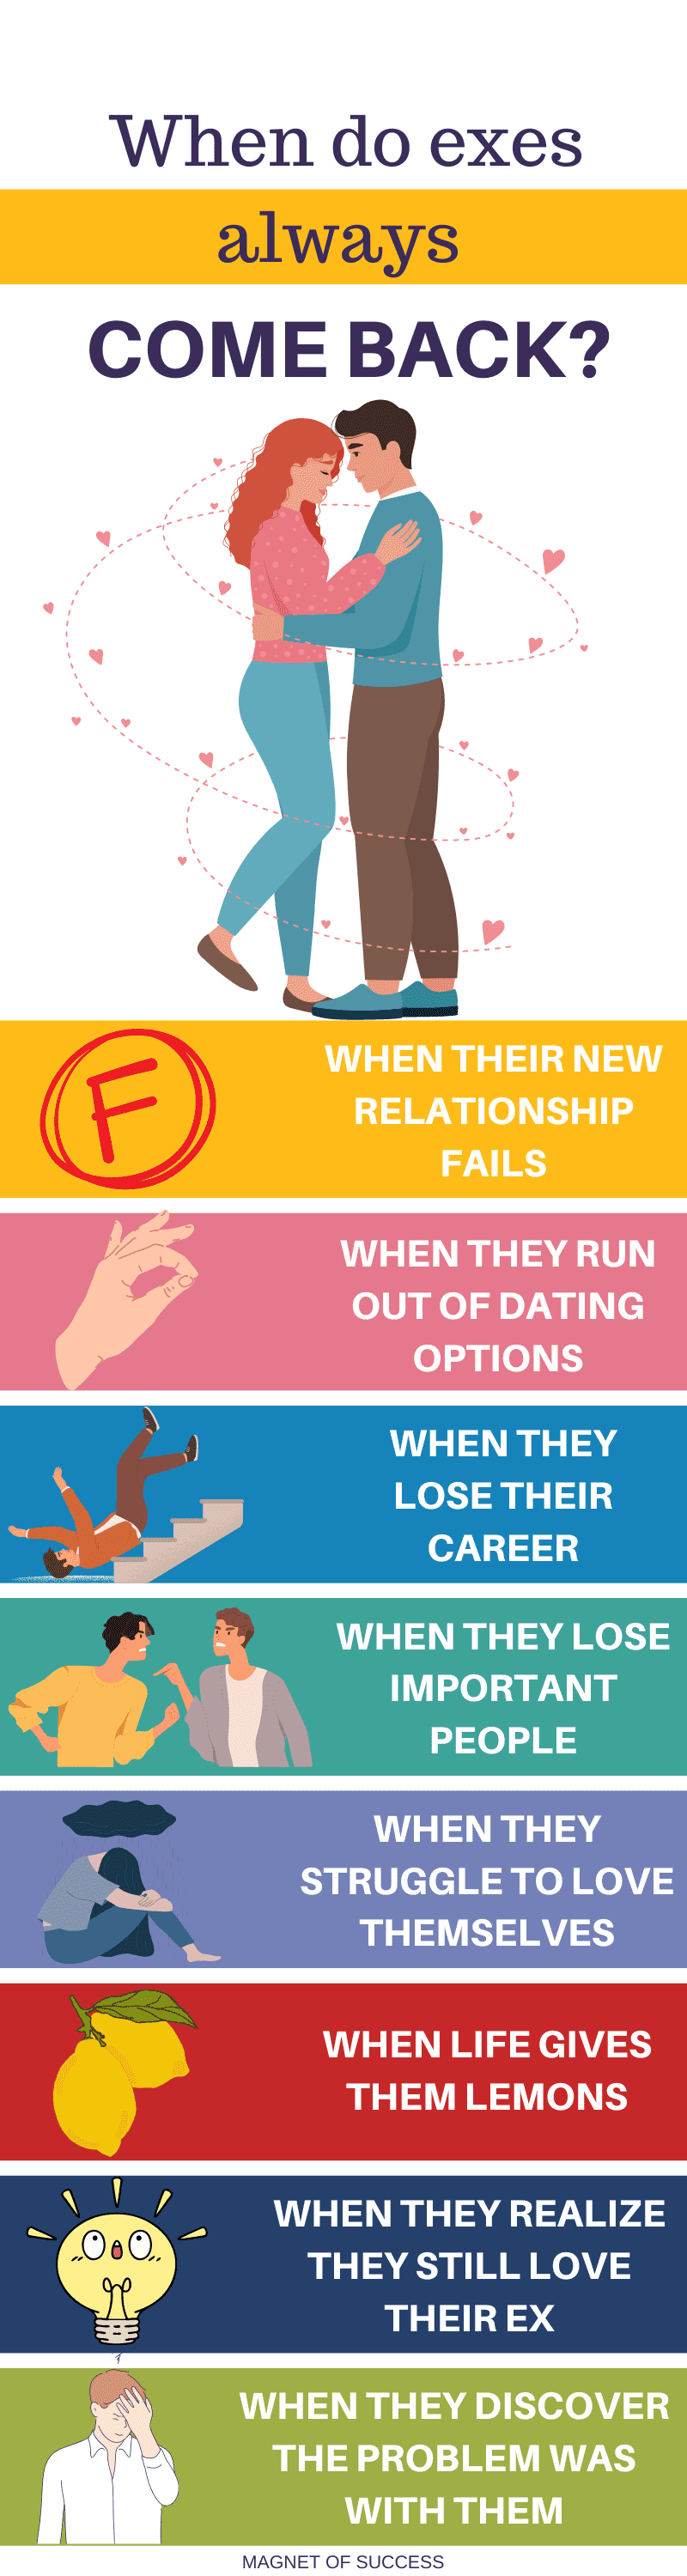 How To Deal With Bipolar Exes Coming Back